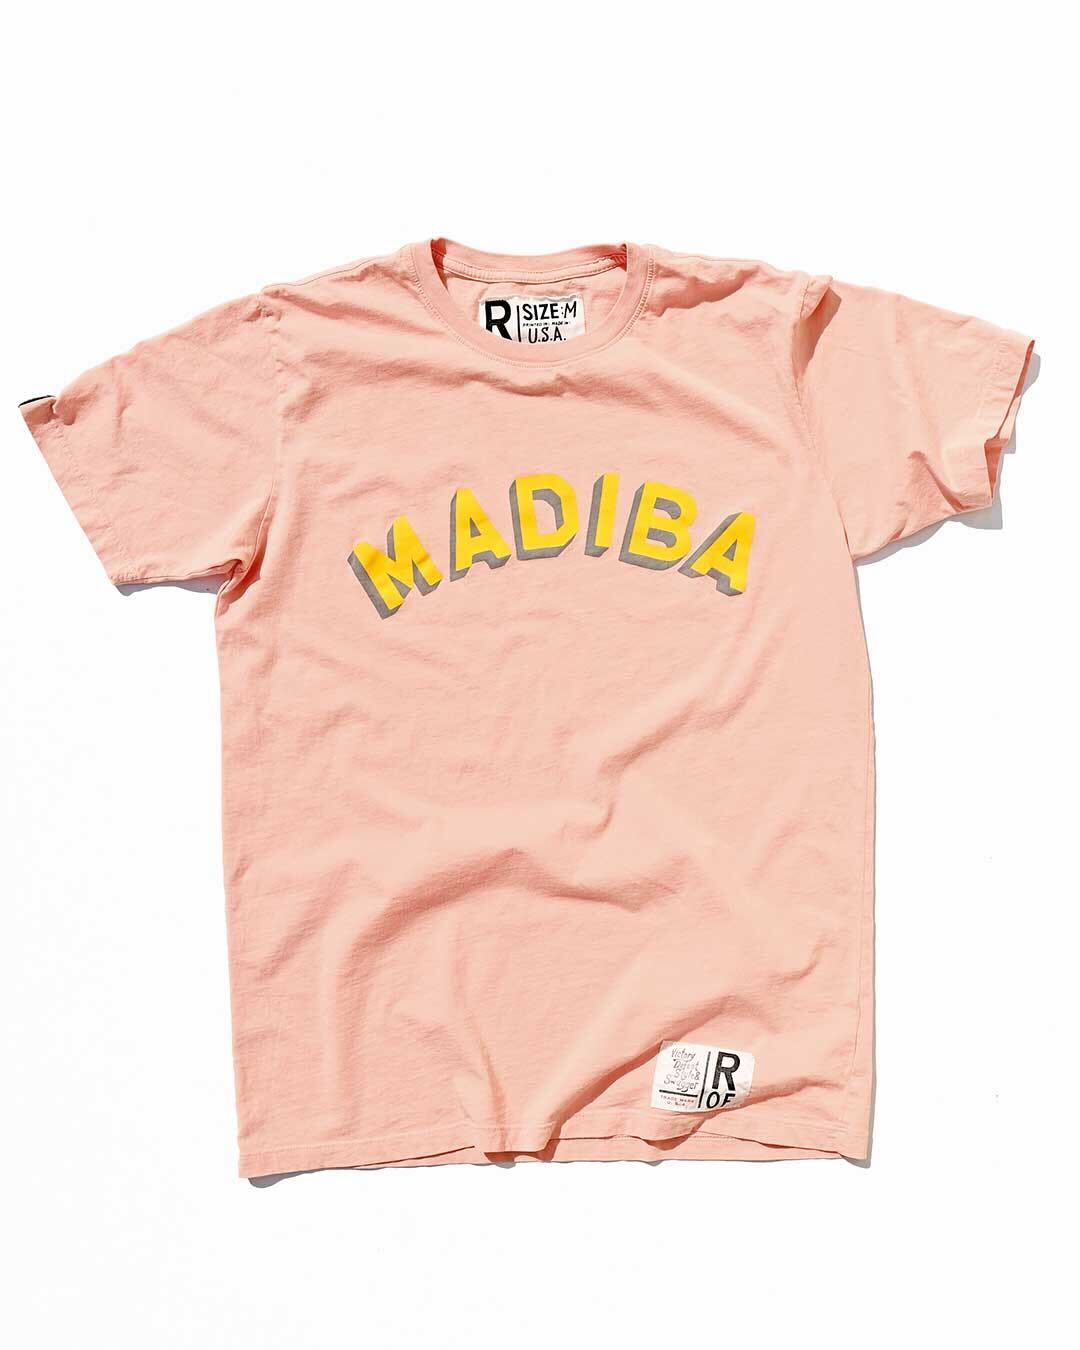 Nelson Mandela 'Madiba' Coral Tee - Roots of Fight Canada